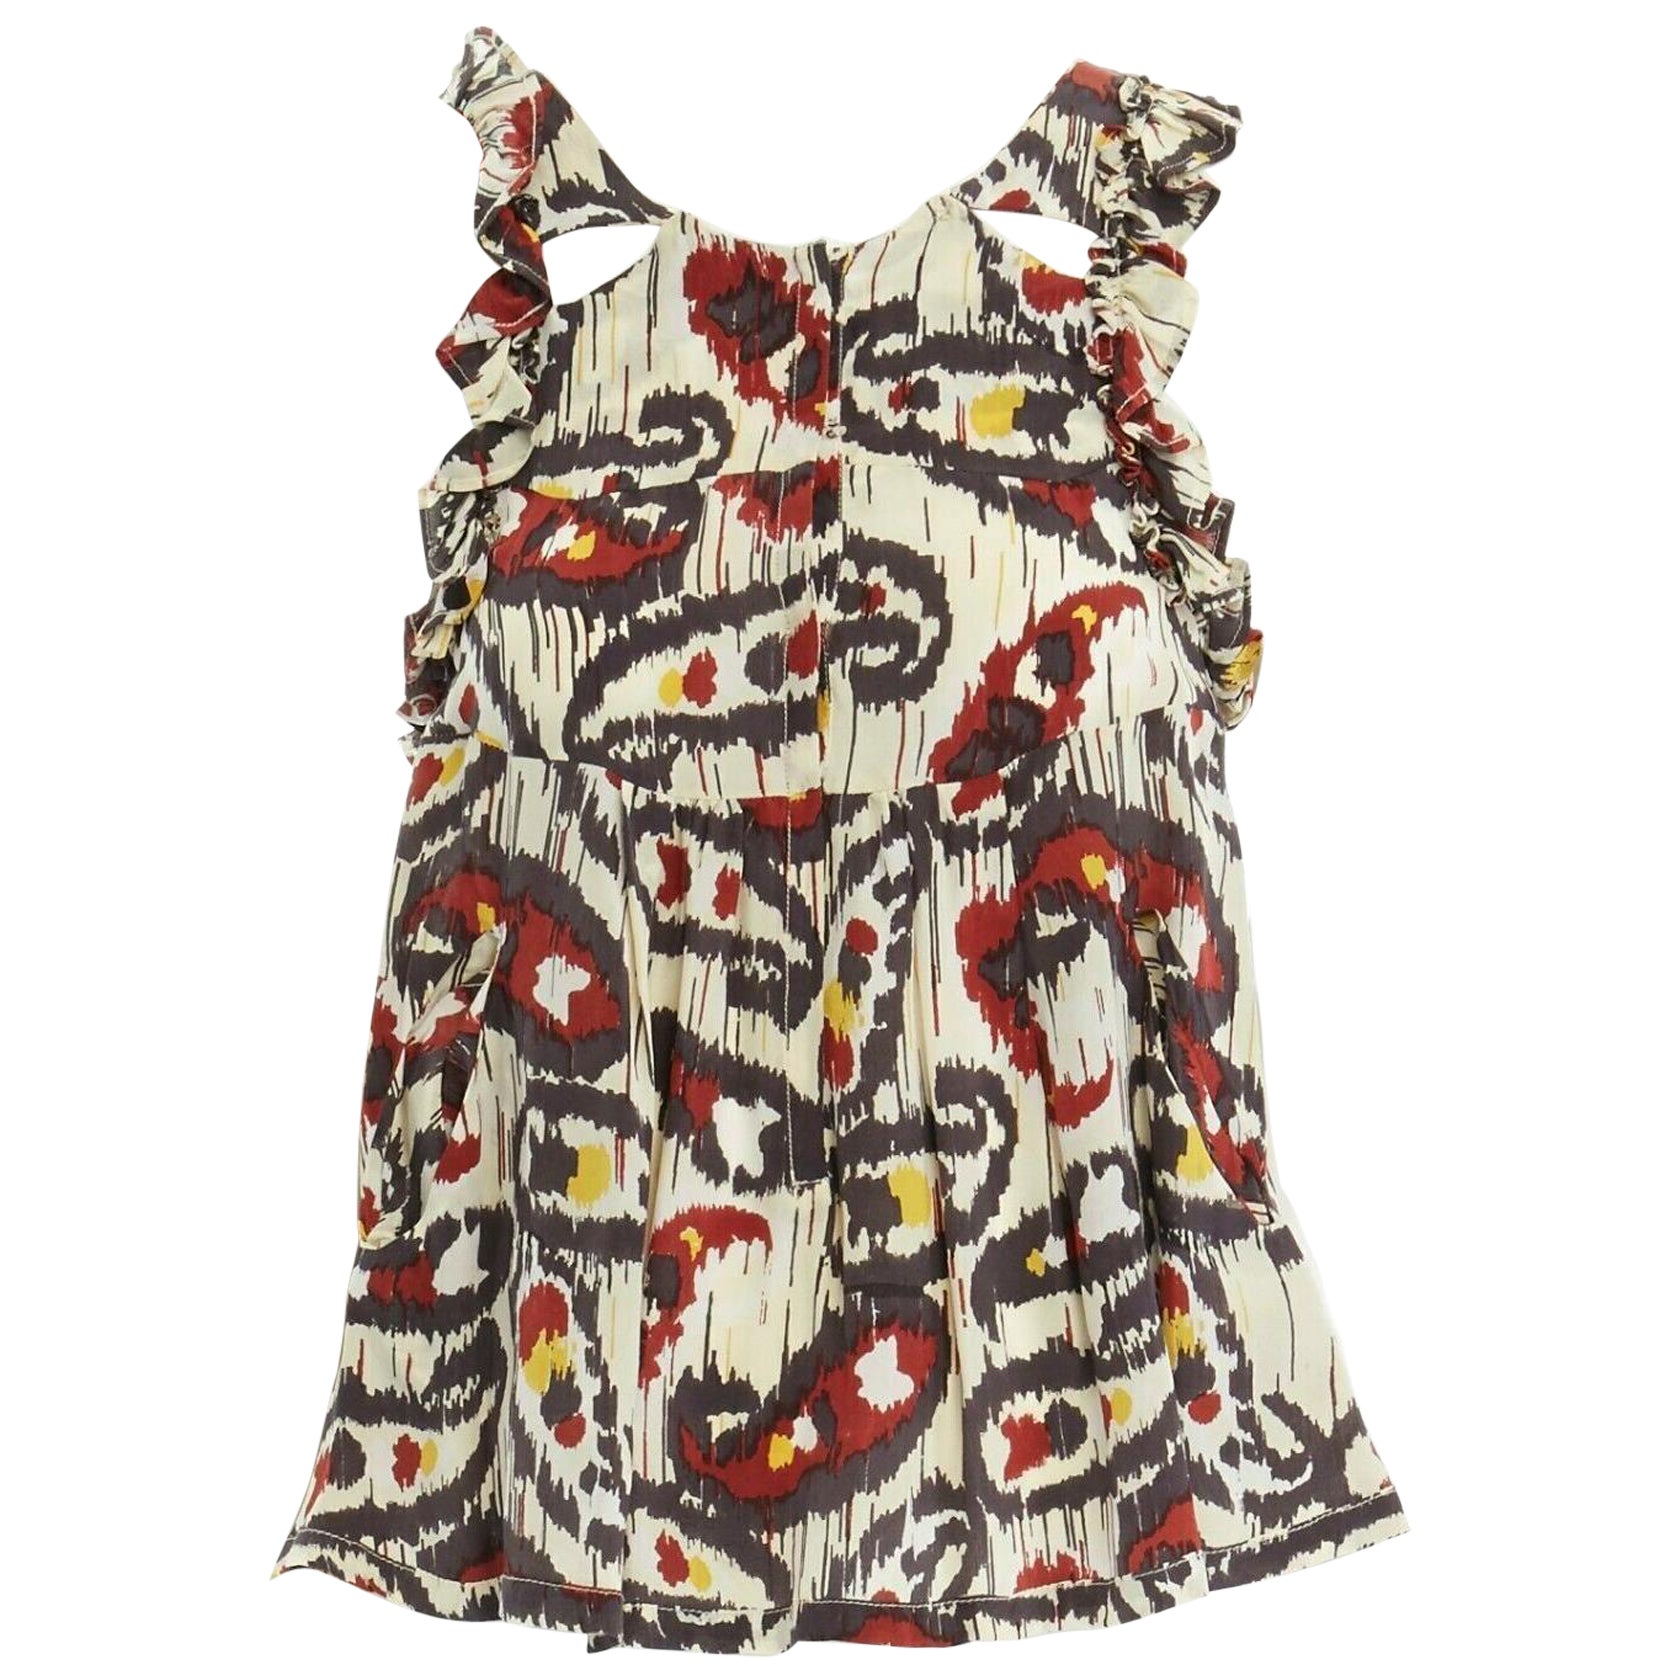 ISABEL MARANT Ikat cream ethnic print silk ruffle cut-out top FR34 XS US2 UK6 For Sale